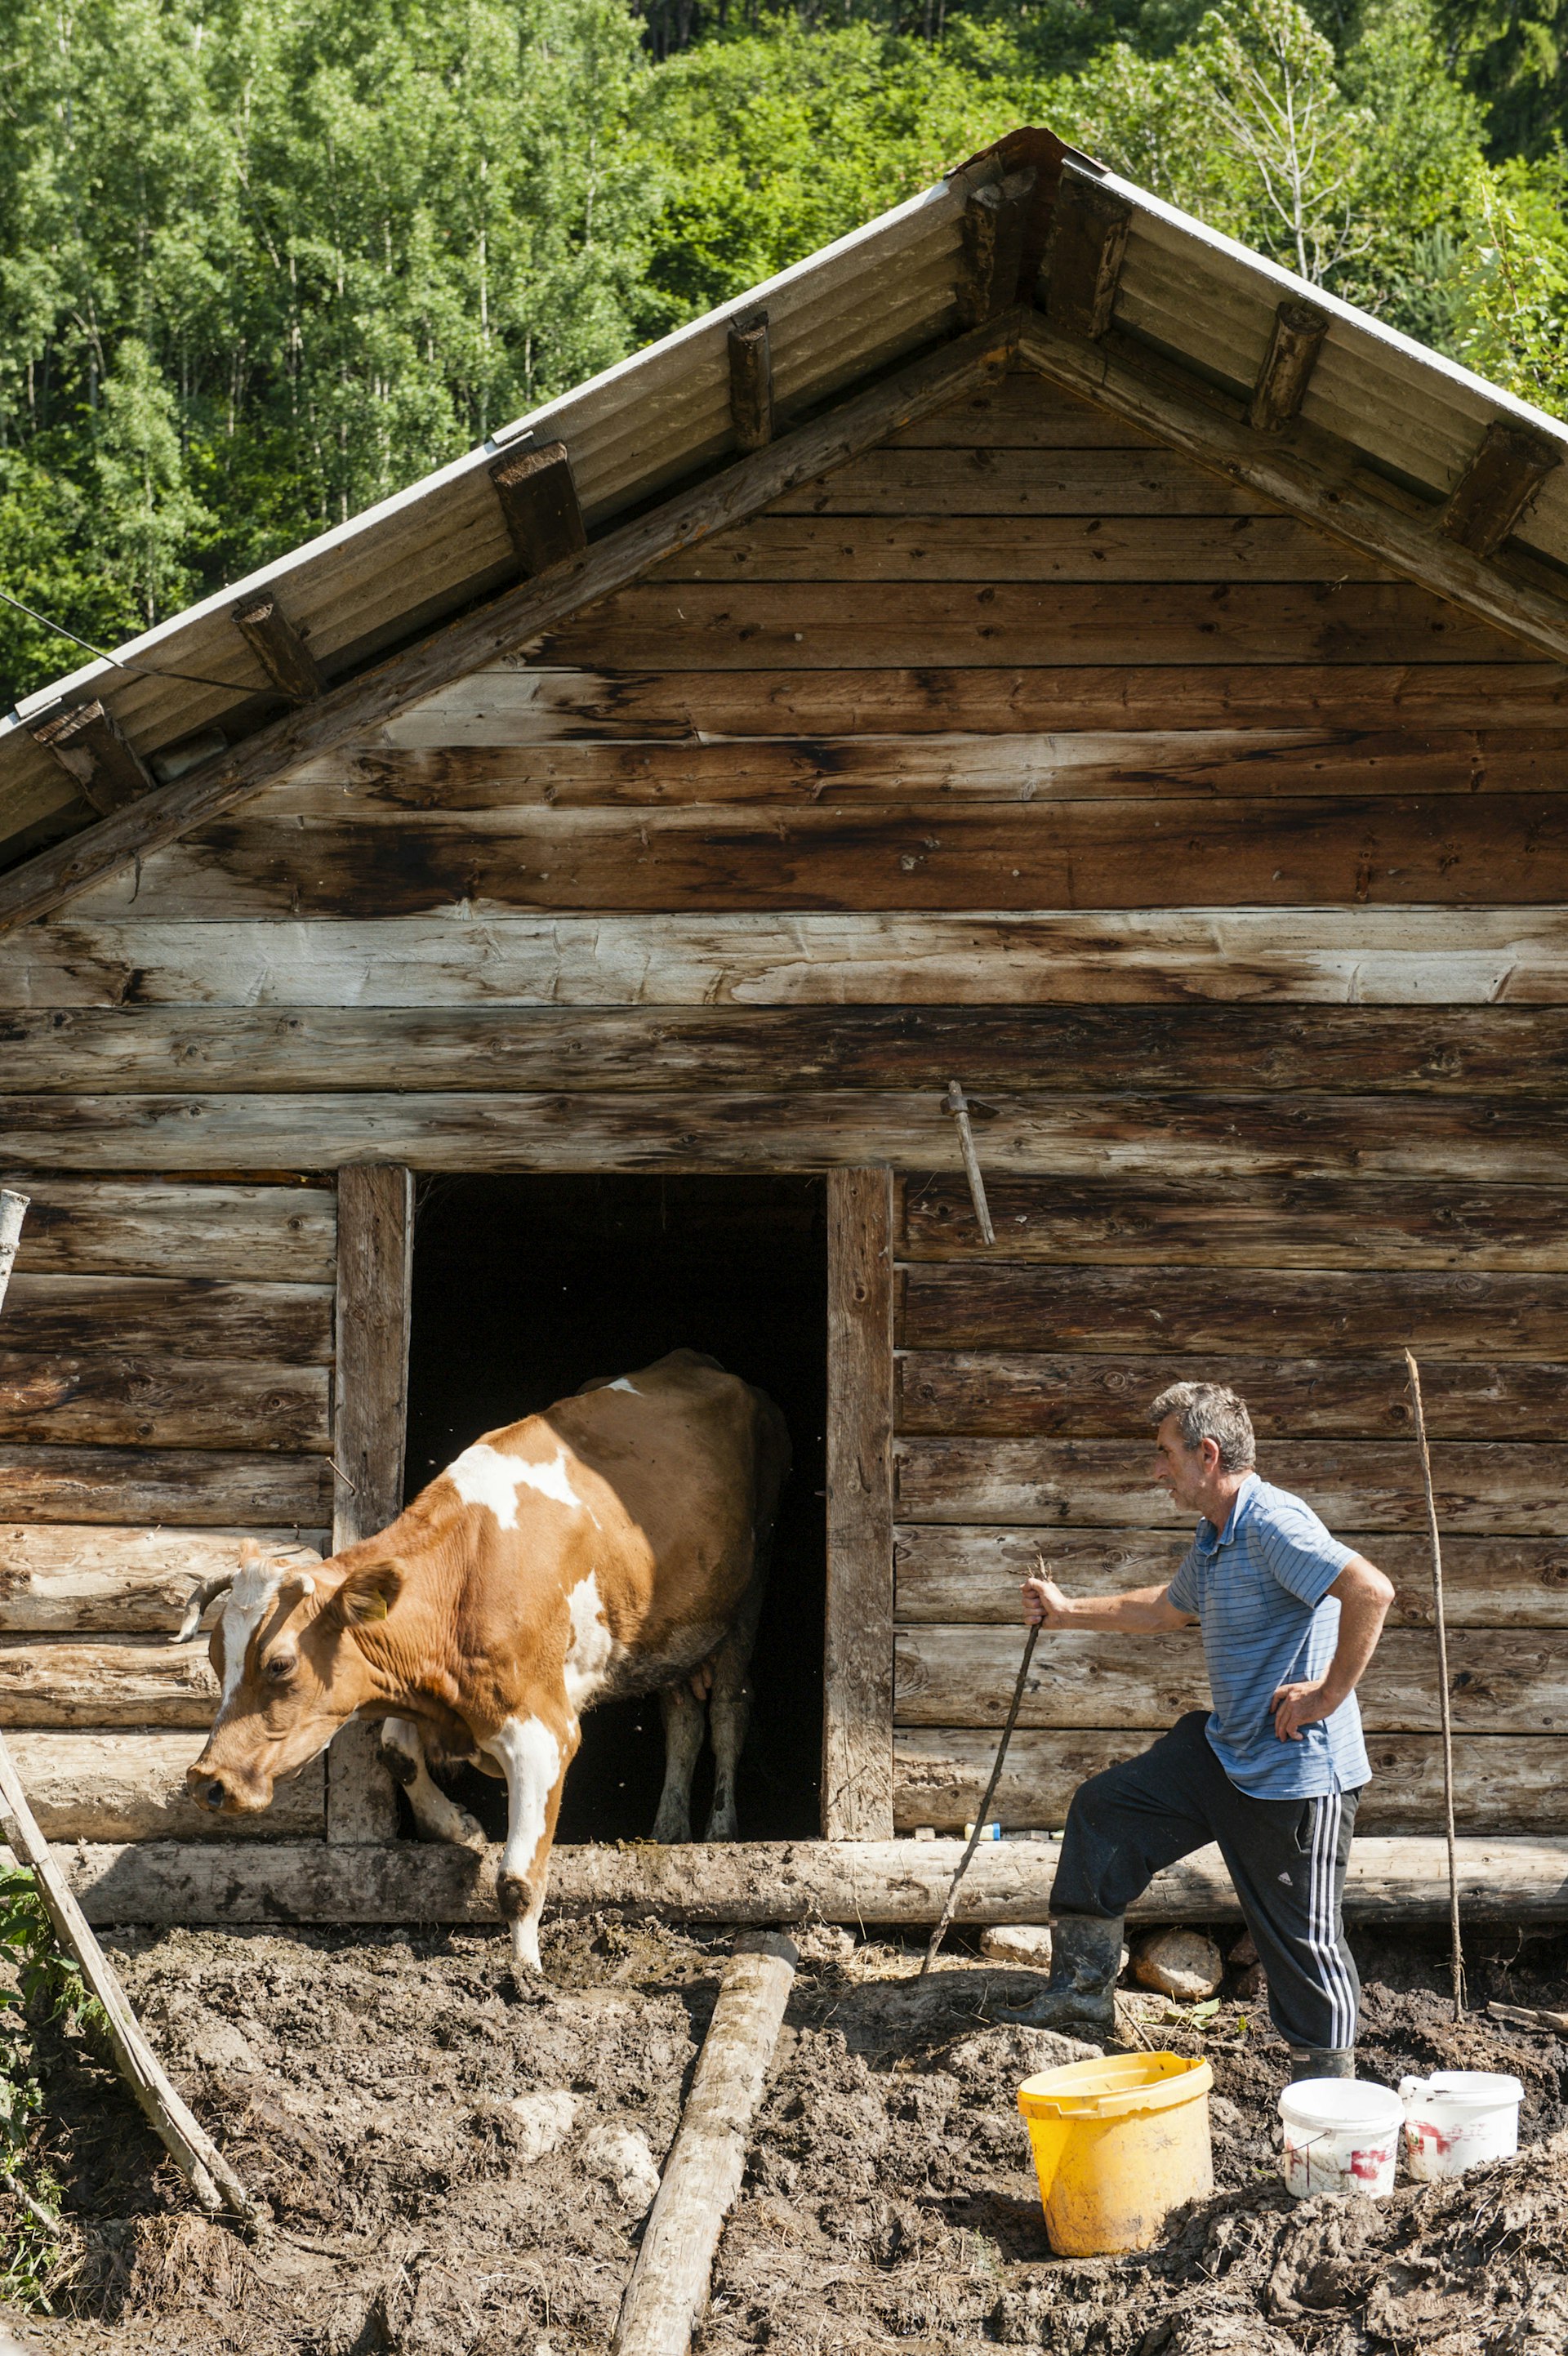 A farmer stands looking at his cow coming out of a wooden barn